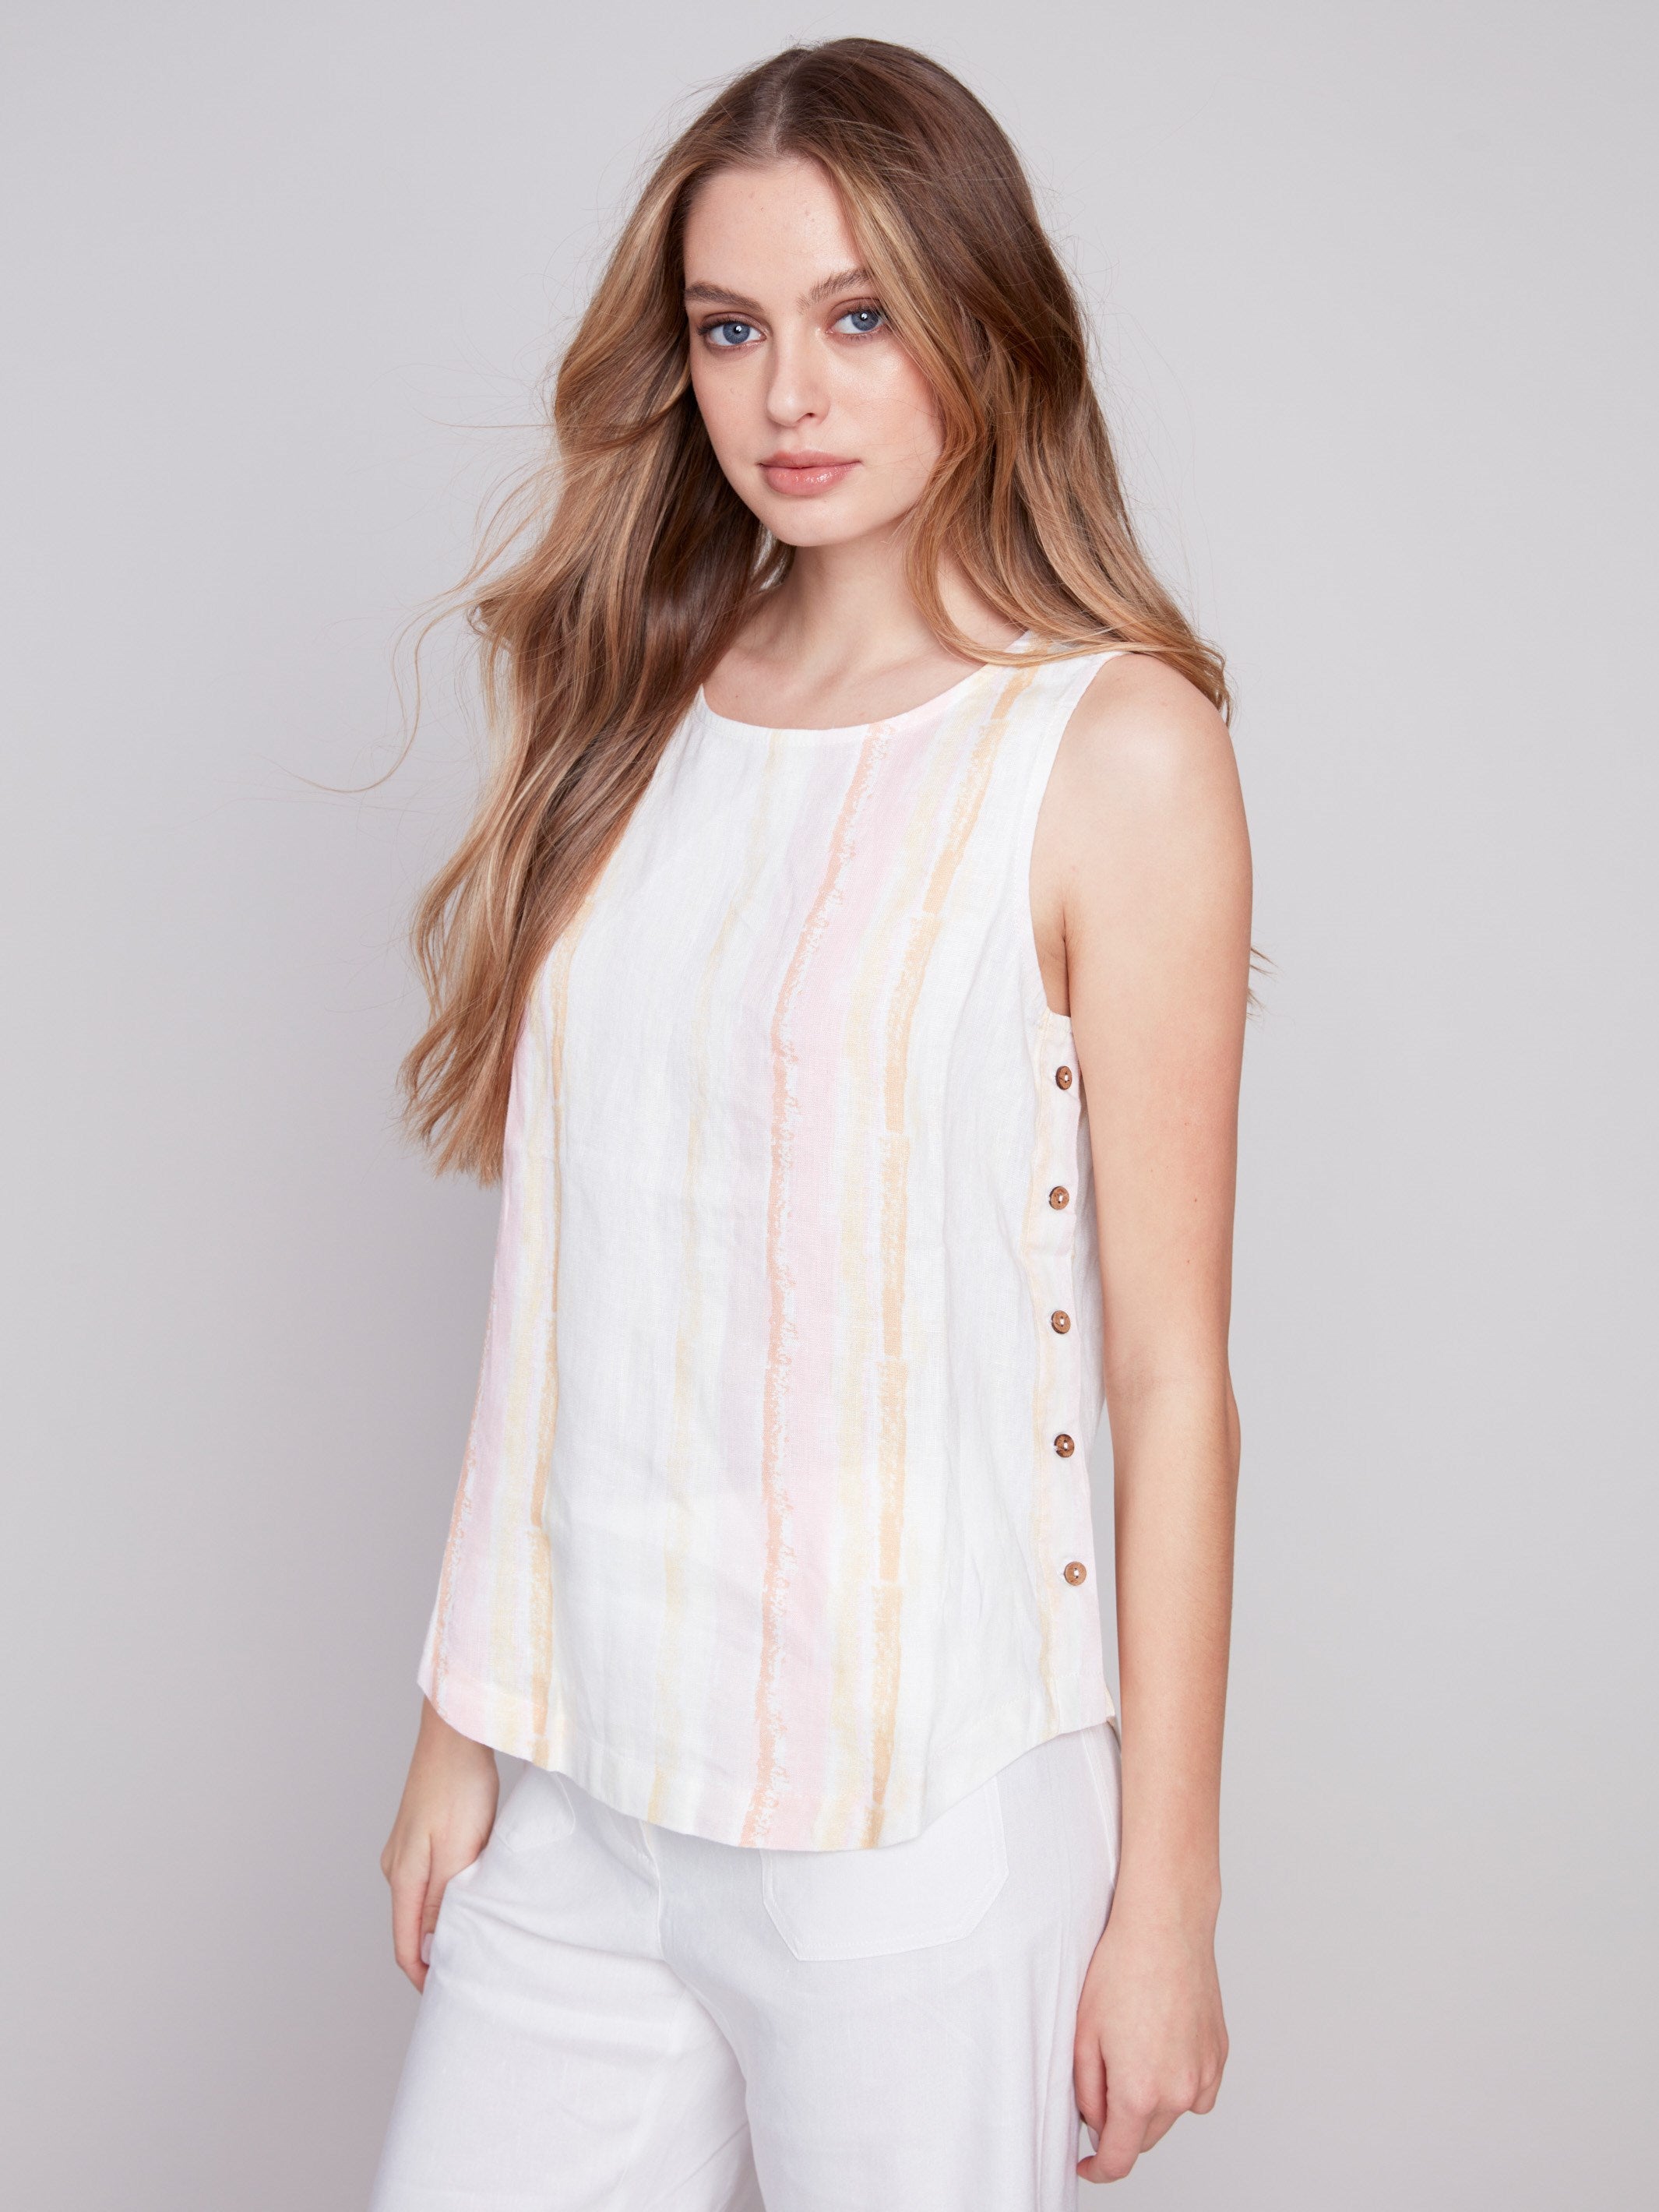 Printed Linen Top with Side Buttons - Tulip - Charlie B Collection Canada - Image 1